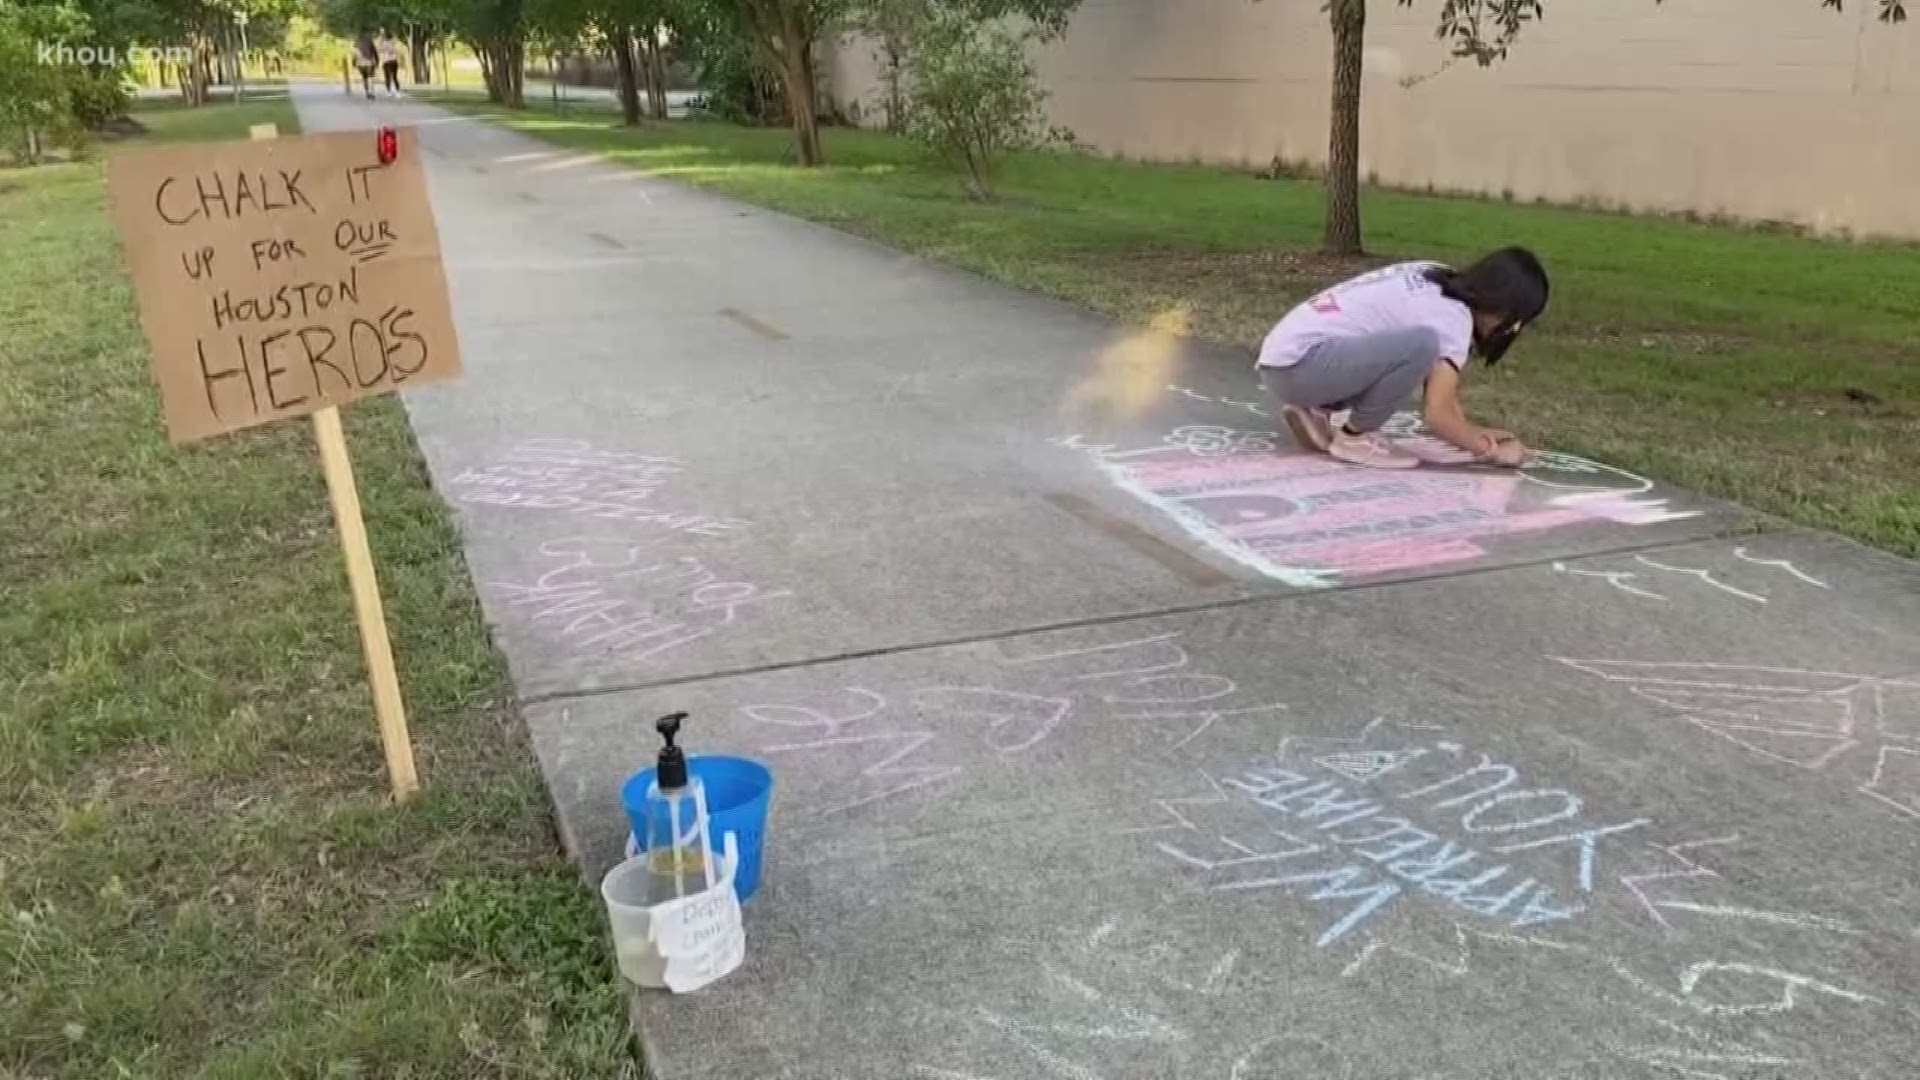 Houston neighbors are decorating sidewalks with inspiring messages and images written in colorful chalk.